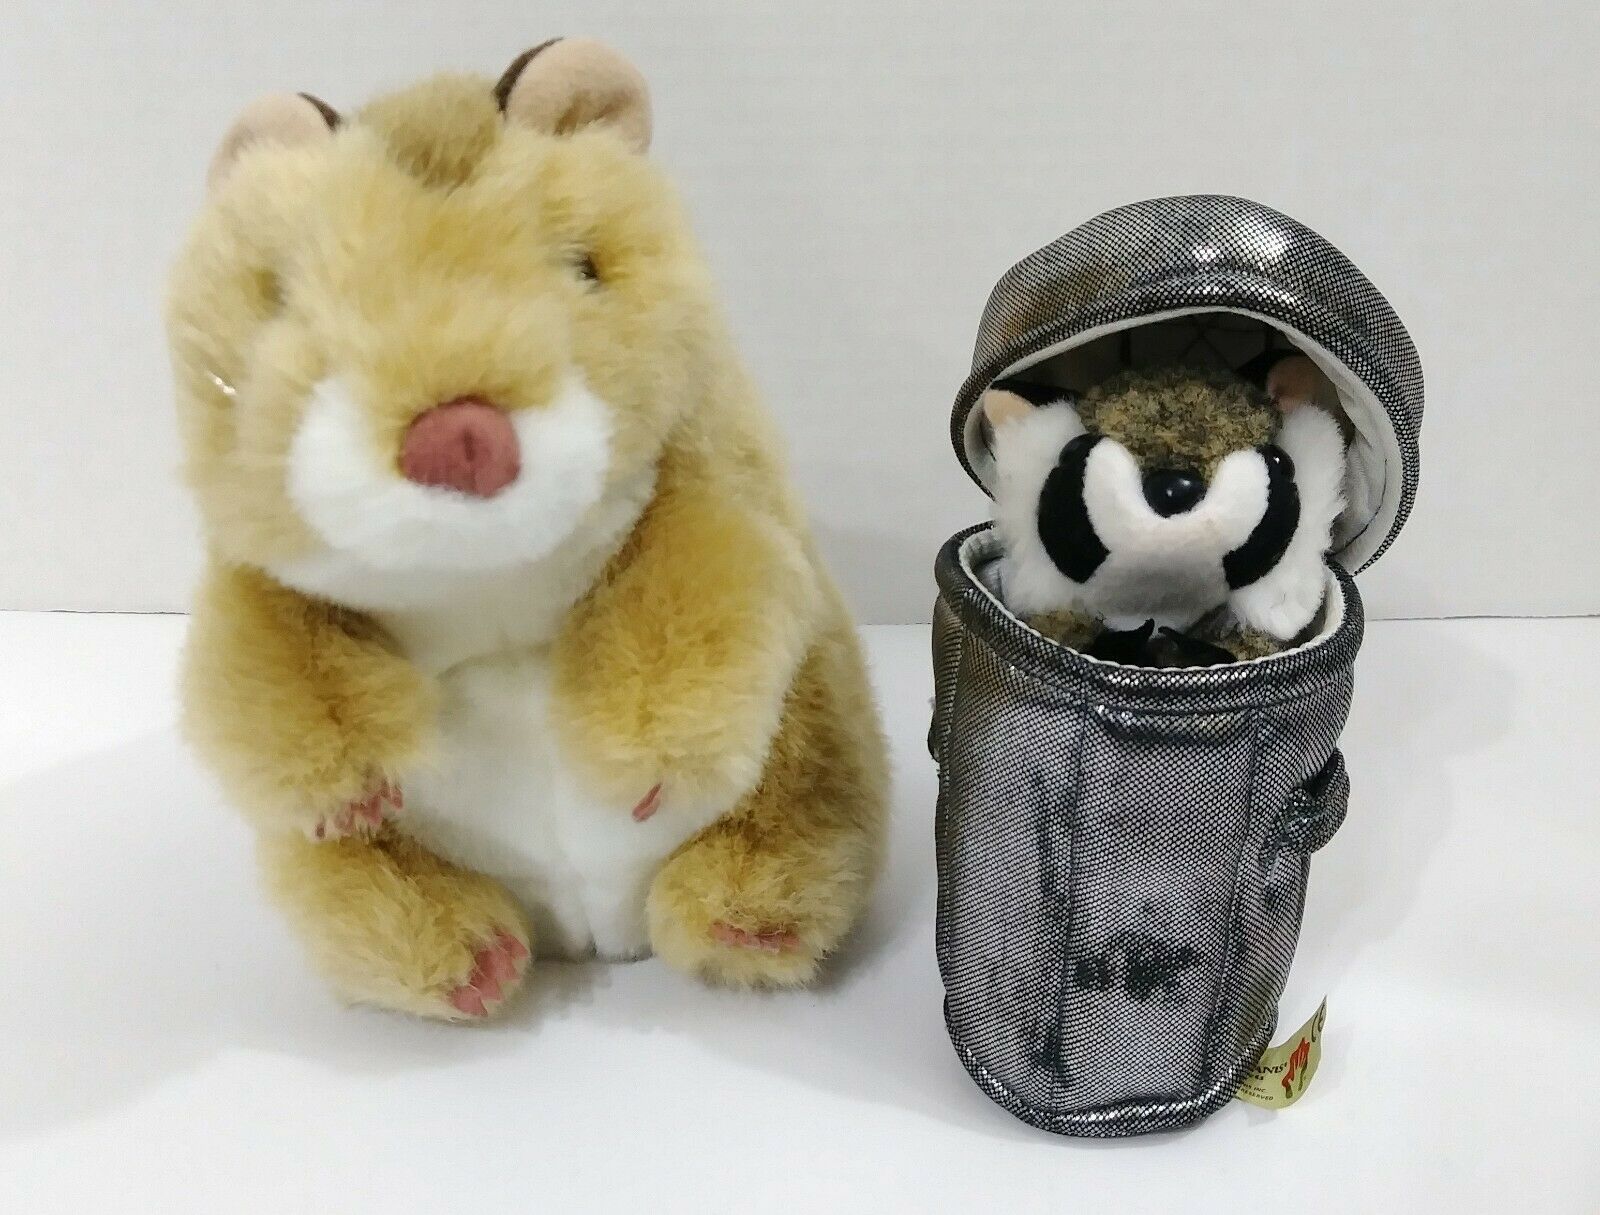 Primary image for Folkmanis Hamster & Mini Raccoon In Trash Can Plush Hand Puppets Toys 7" Inches